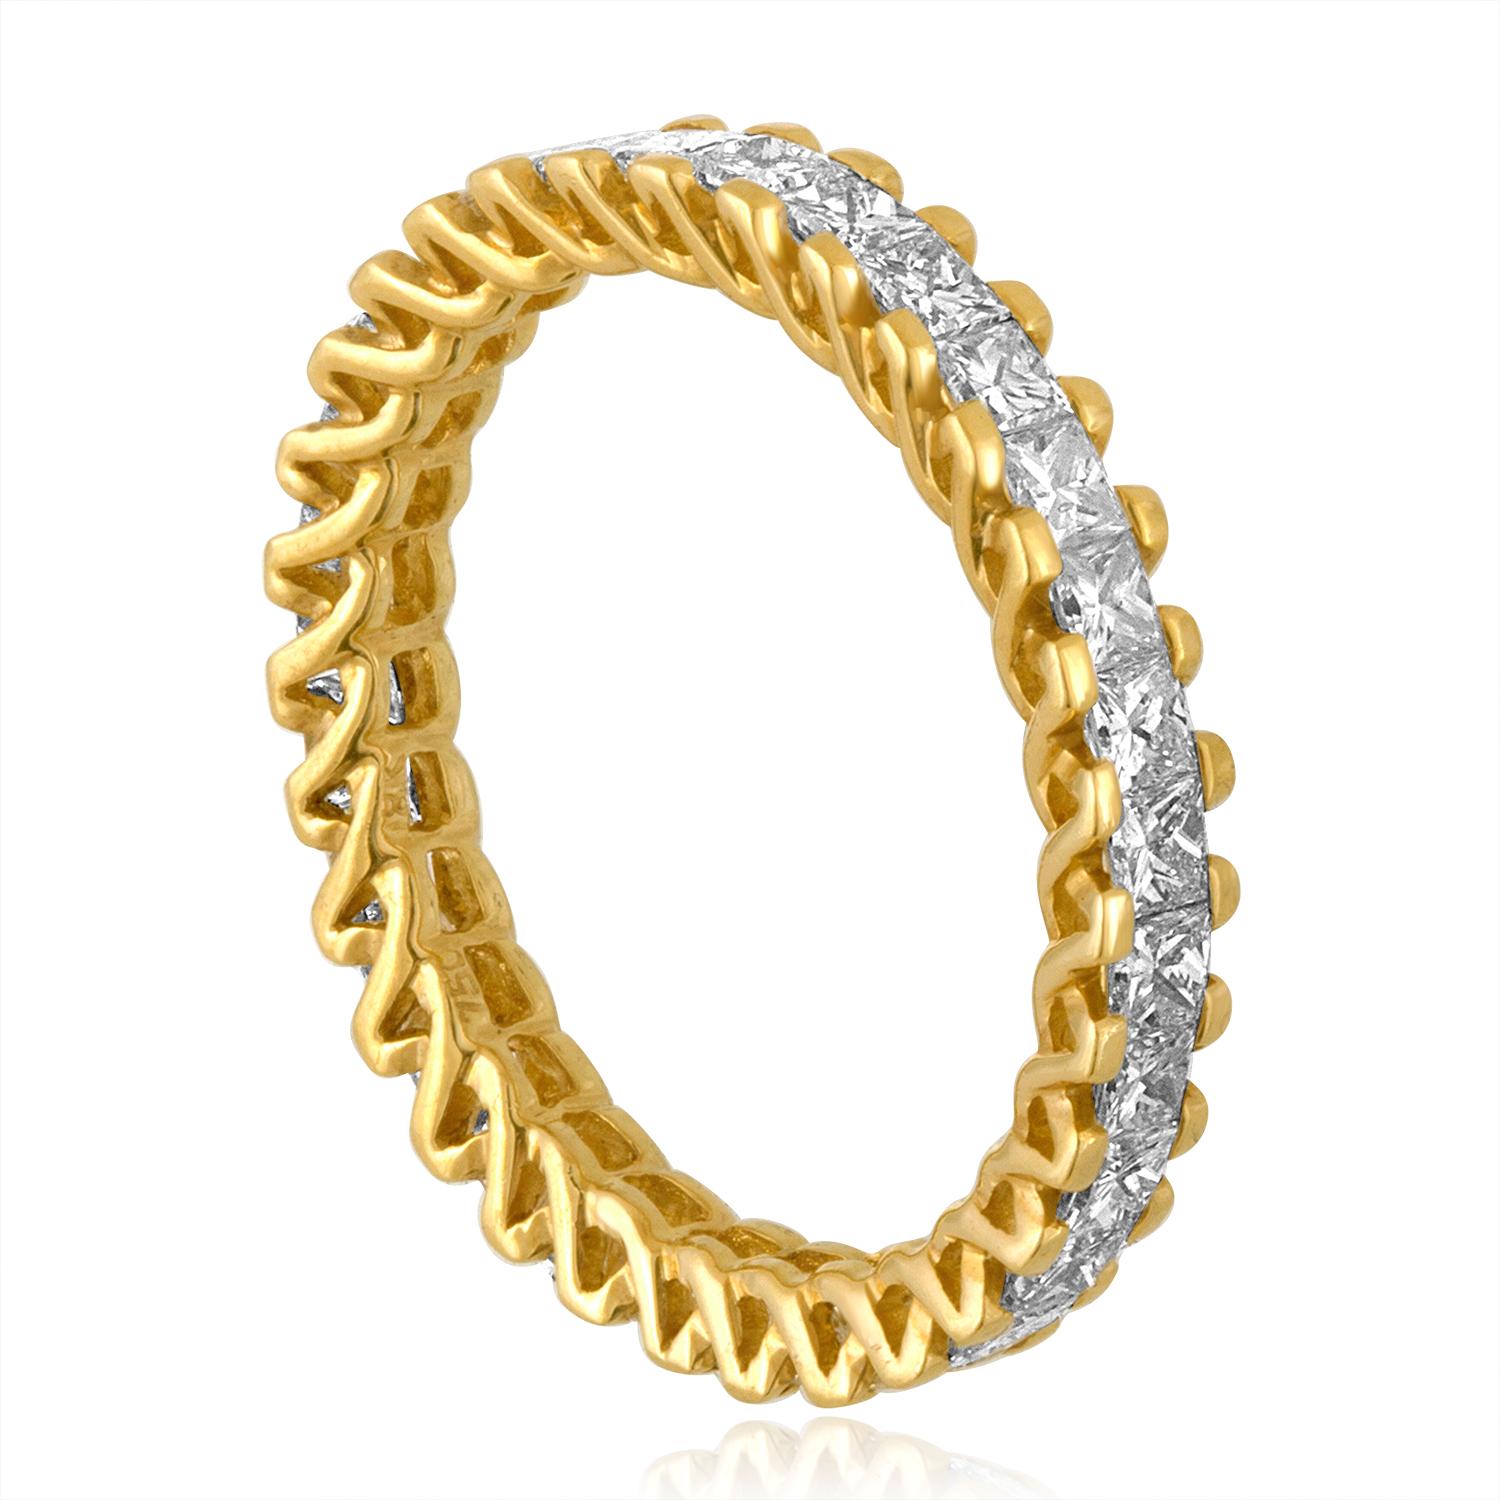 Very Unusual Gold Eternity Band
The ring is 18K Yellow Gold
There is 1.85 Carats F VS Princess Cut Diamonds
There are 31 stones in the ring.
The ring is a size 7, not sizable.
The ring weighs 2.4 grams